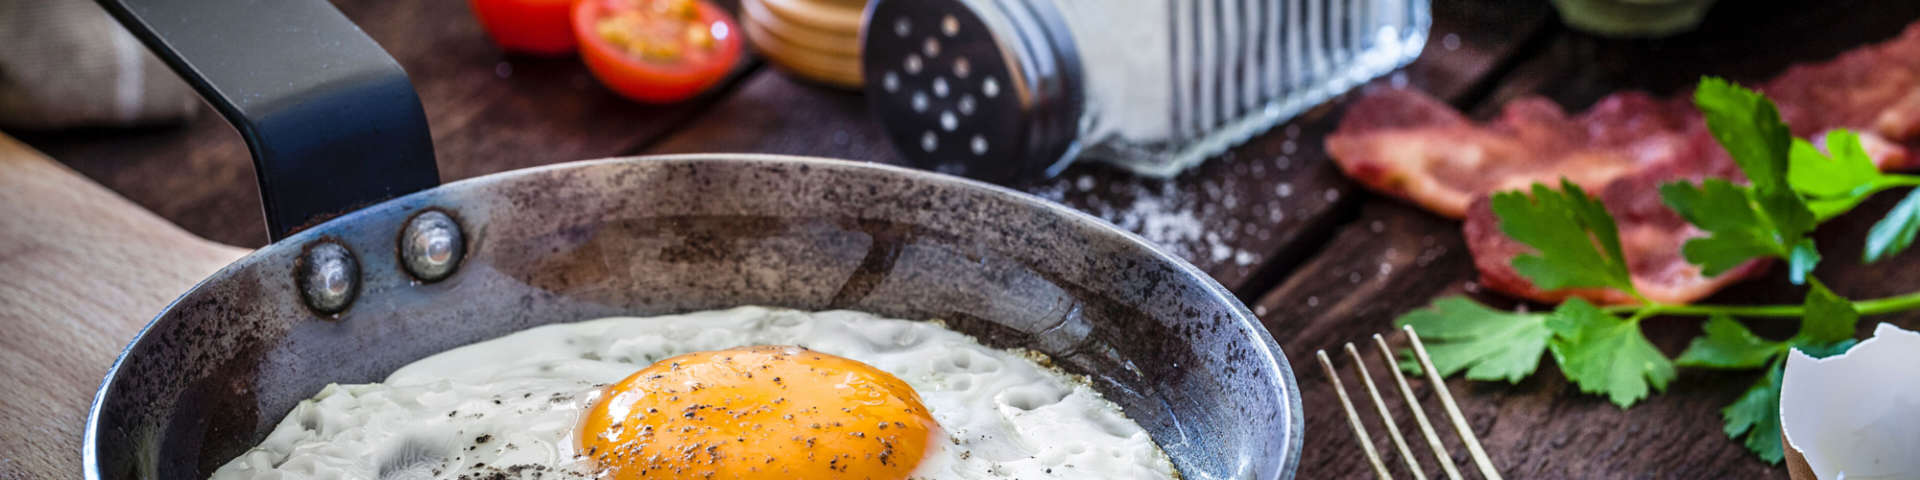 A sunny side up egg in a frying pan.